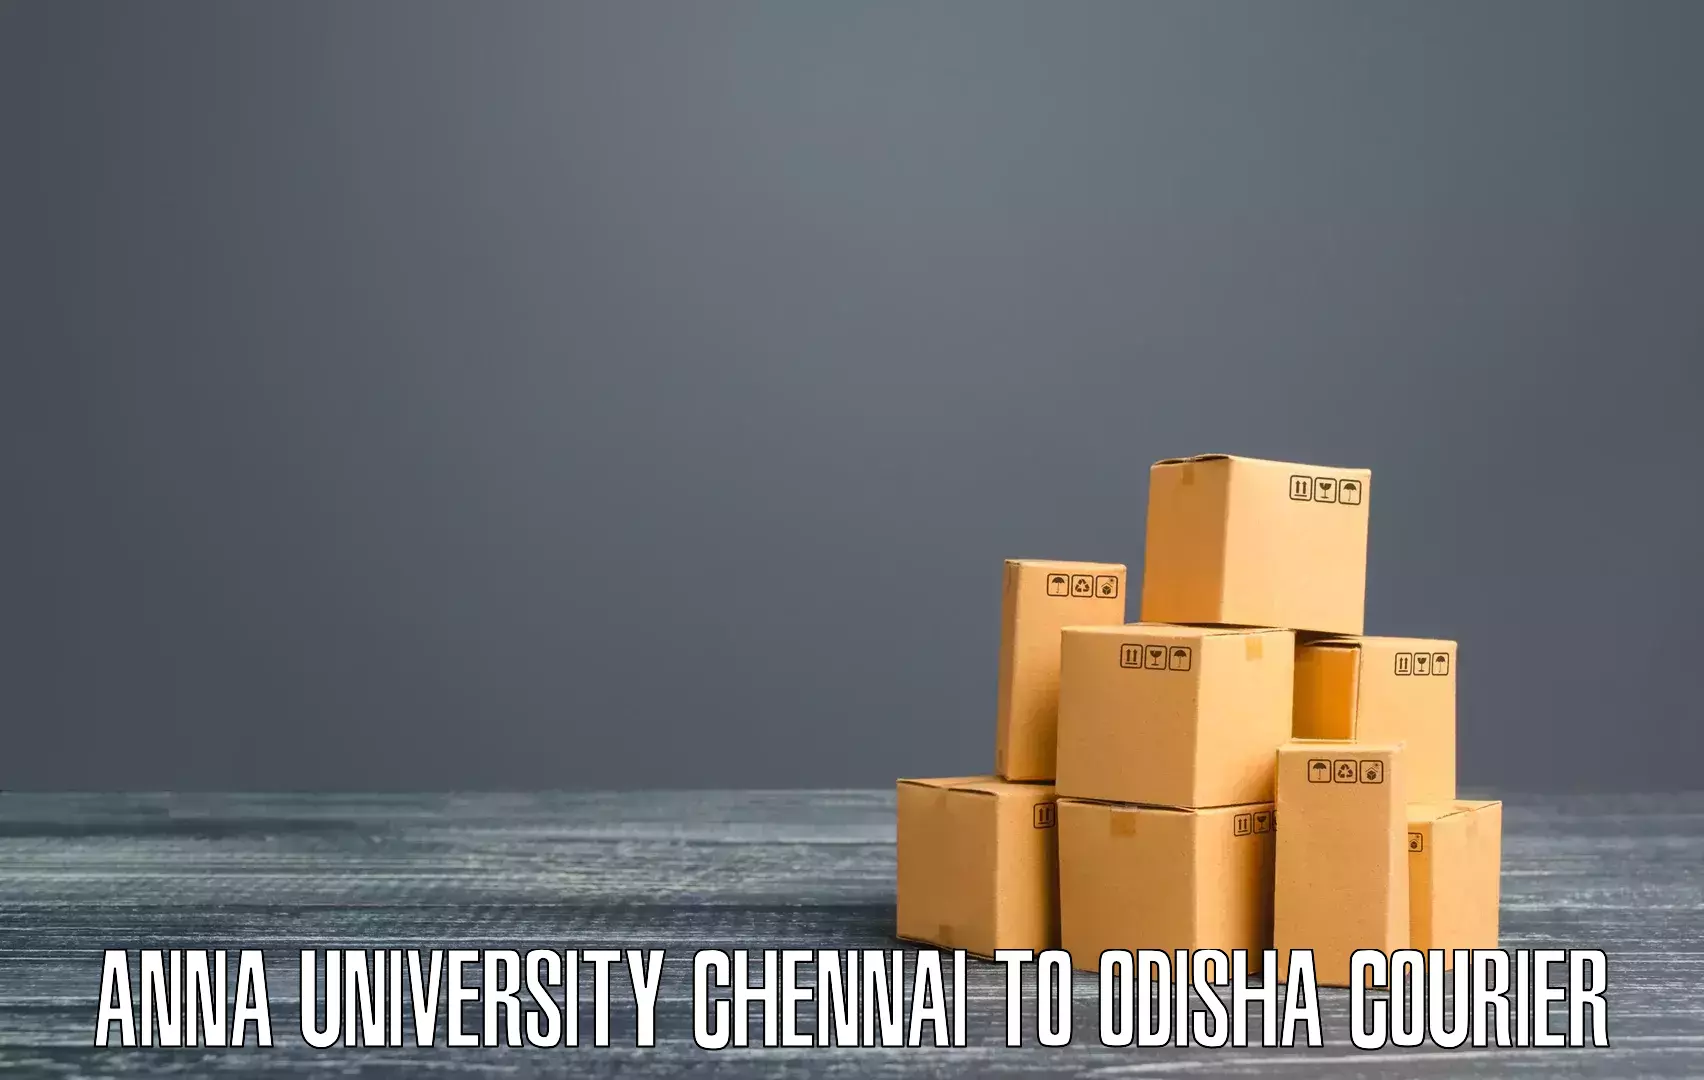 Express delivery network in Anna University Chennai to Bhubaneswar